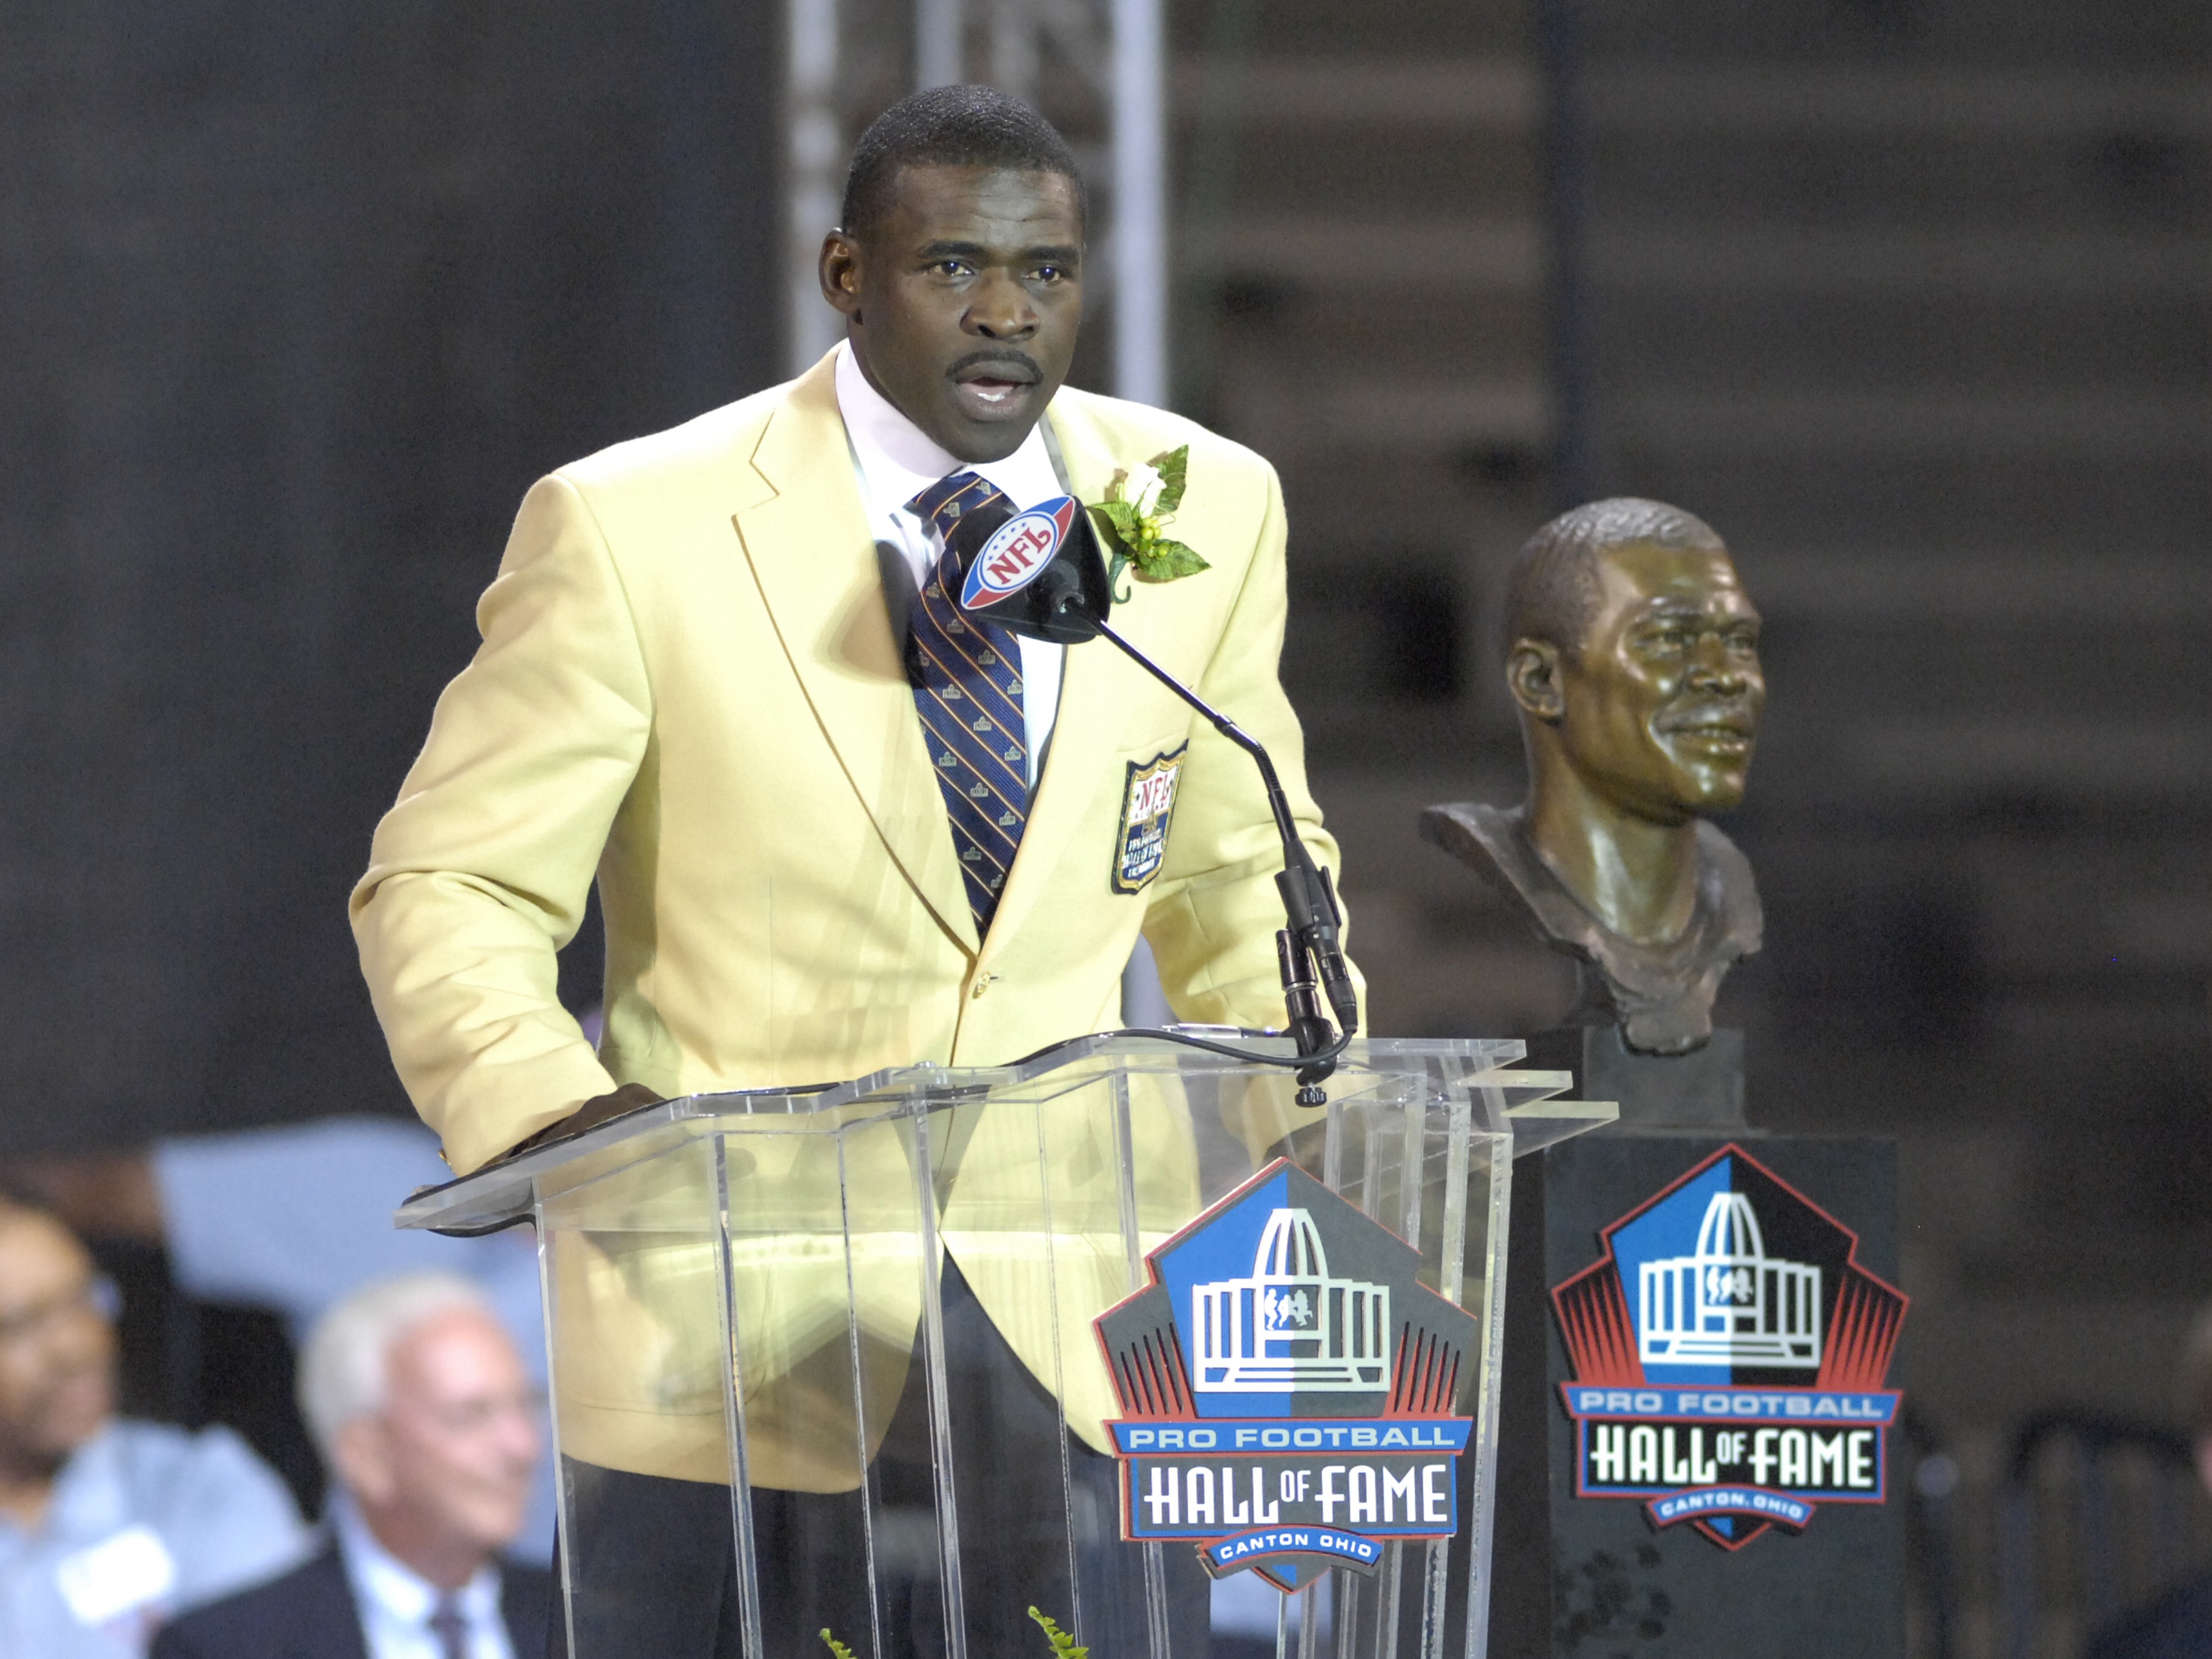 Michael Jordan and 13 Other Ridiculous Hall of Fame Induction